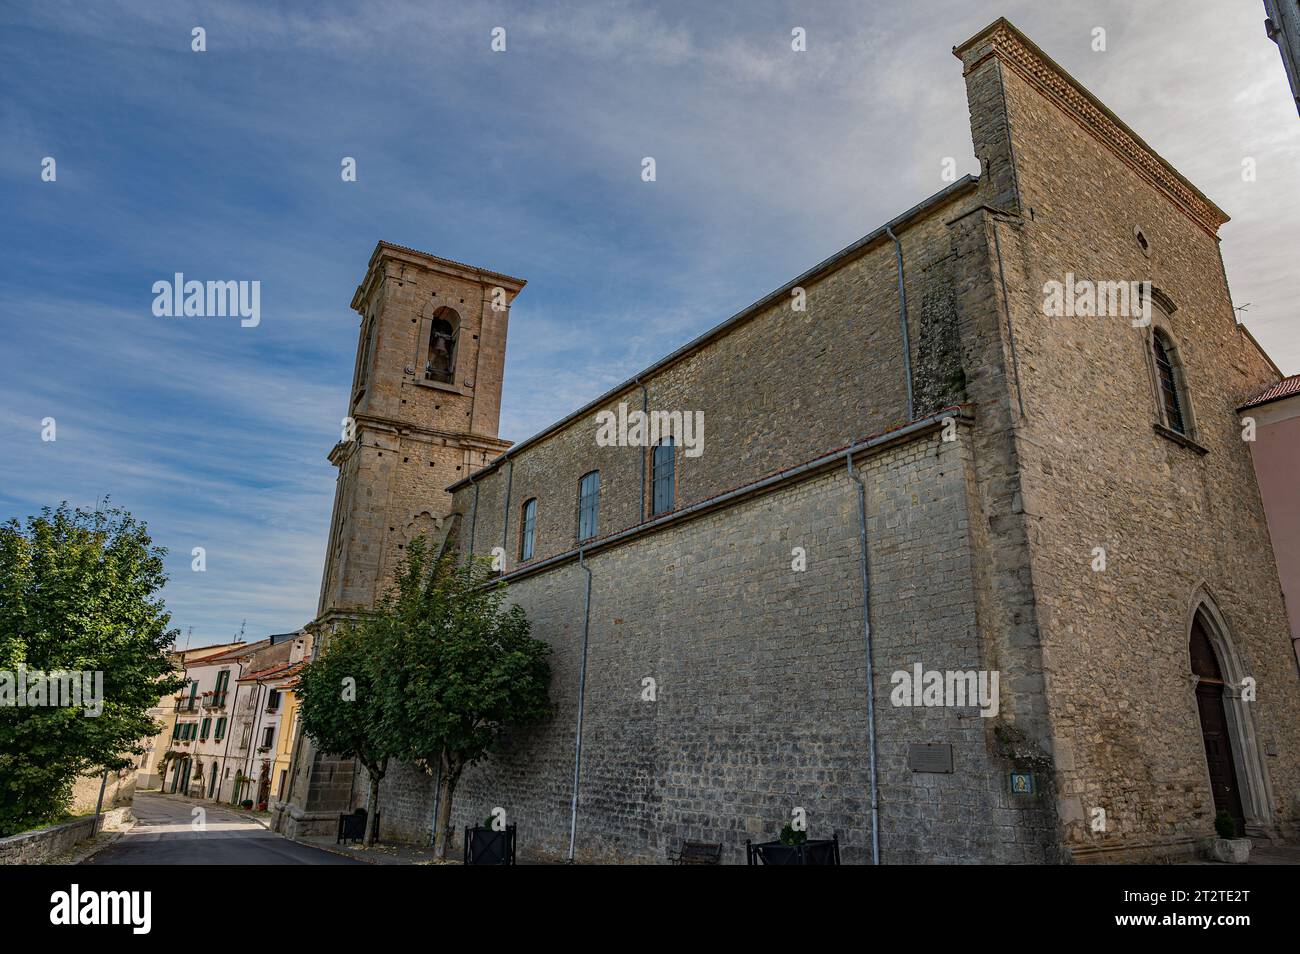 It could be identified as 1118, the year of construction of the original building. The current church was built before the 17th century. Stock Photo